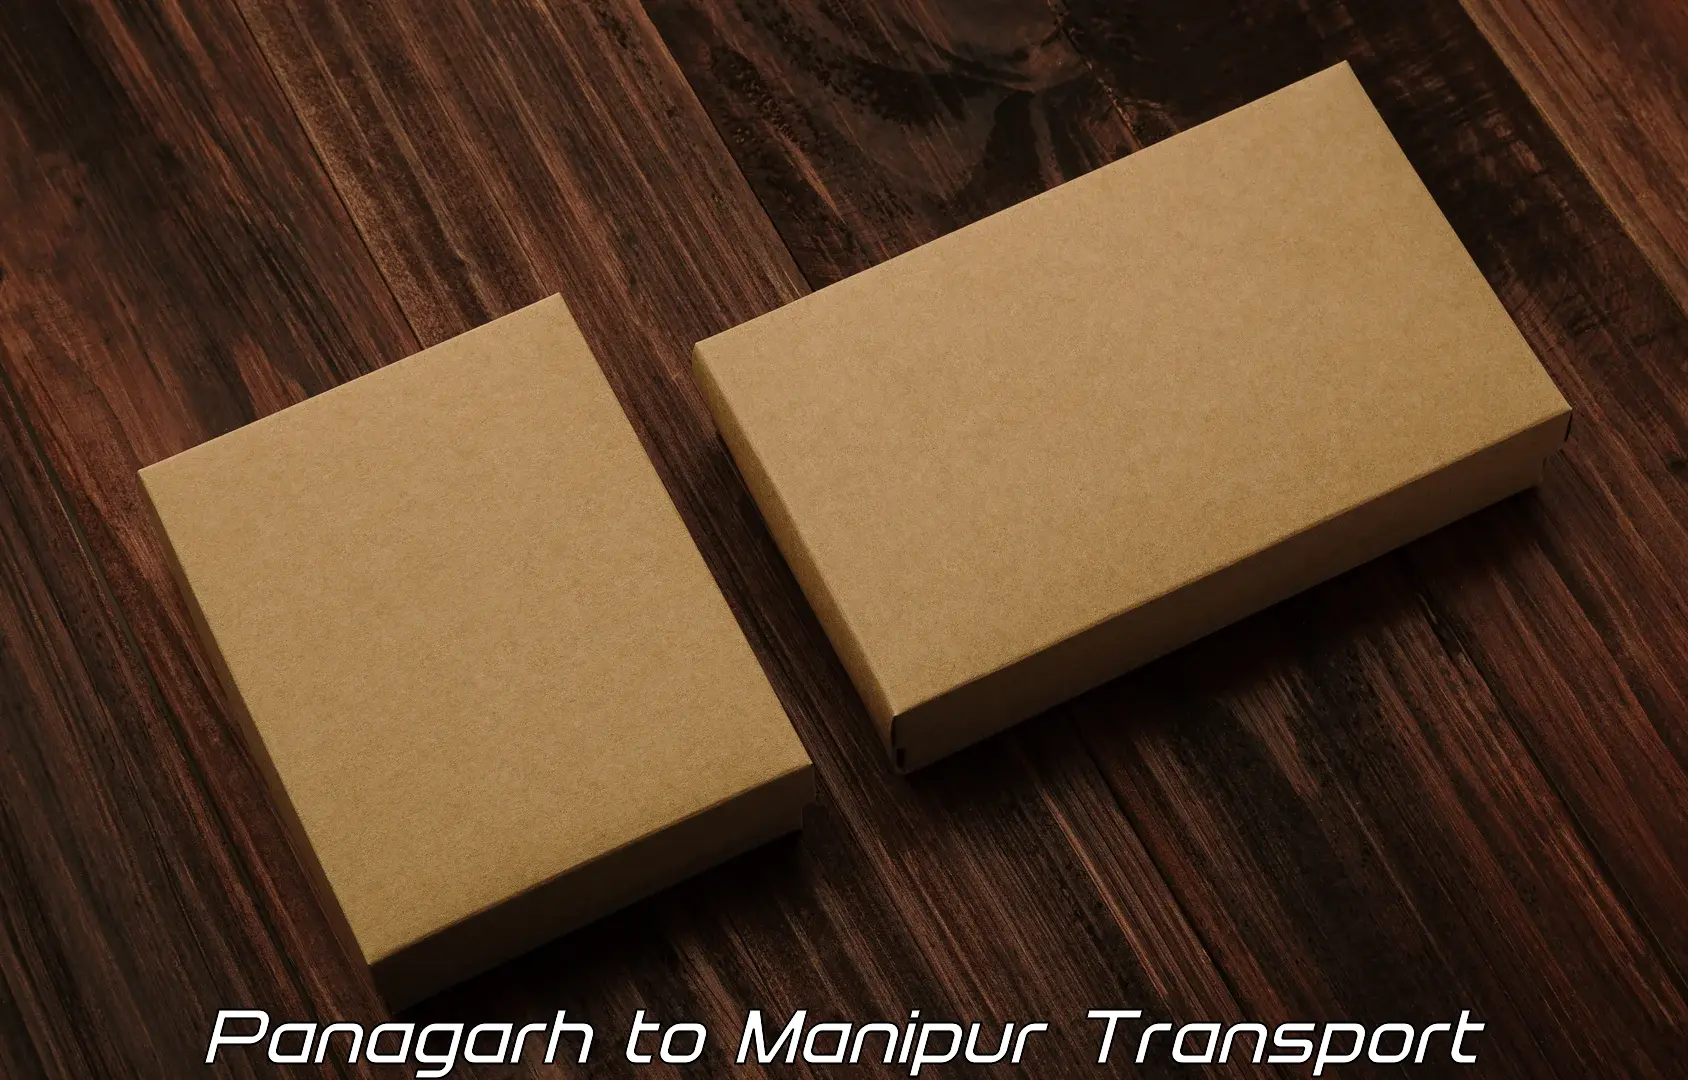 Domestic transport services Panagarh to Chandel